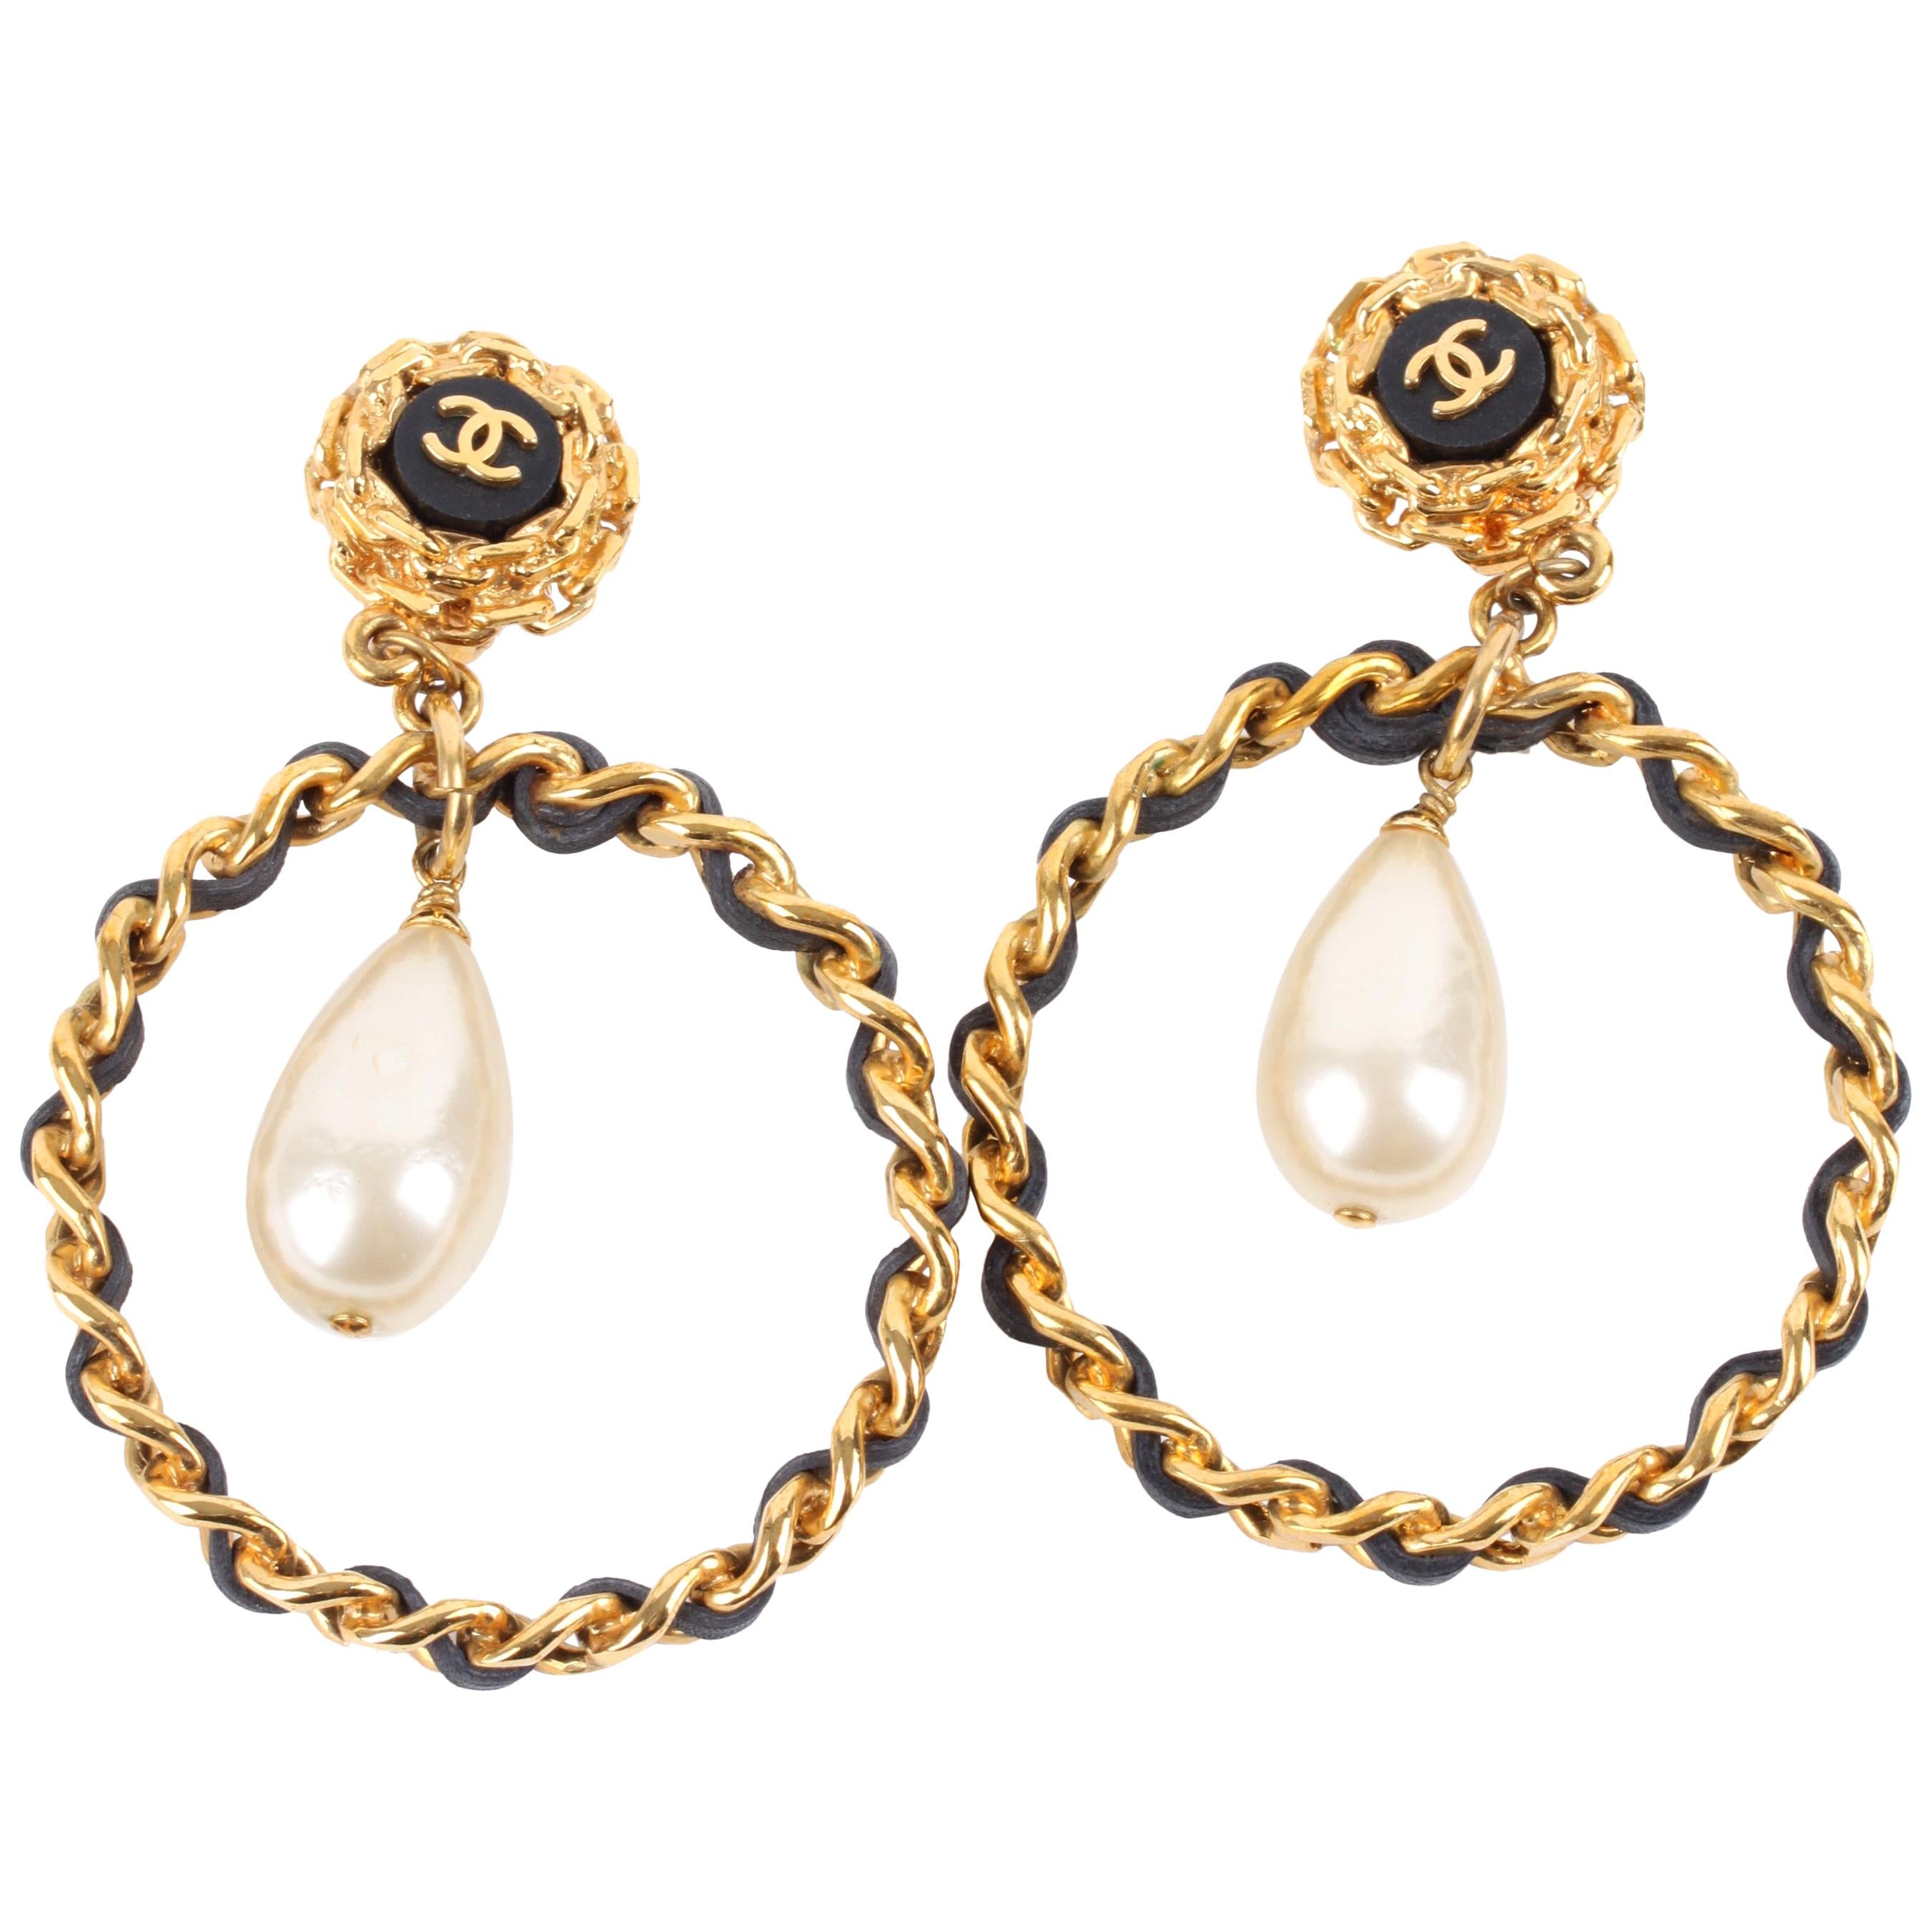   Chanel Vintage 90's Hoop Earrings with Pearl Drop - gold/black    For Sale